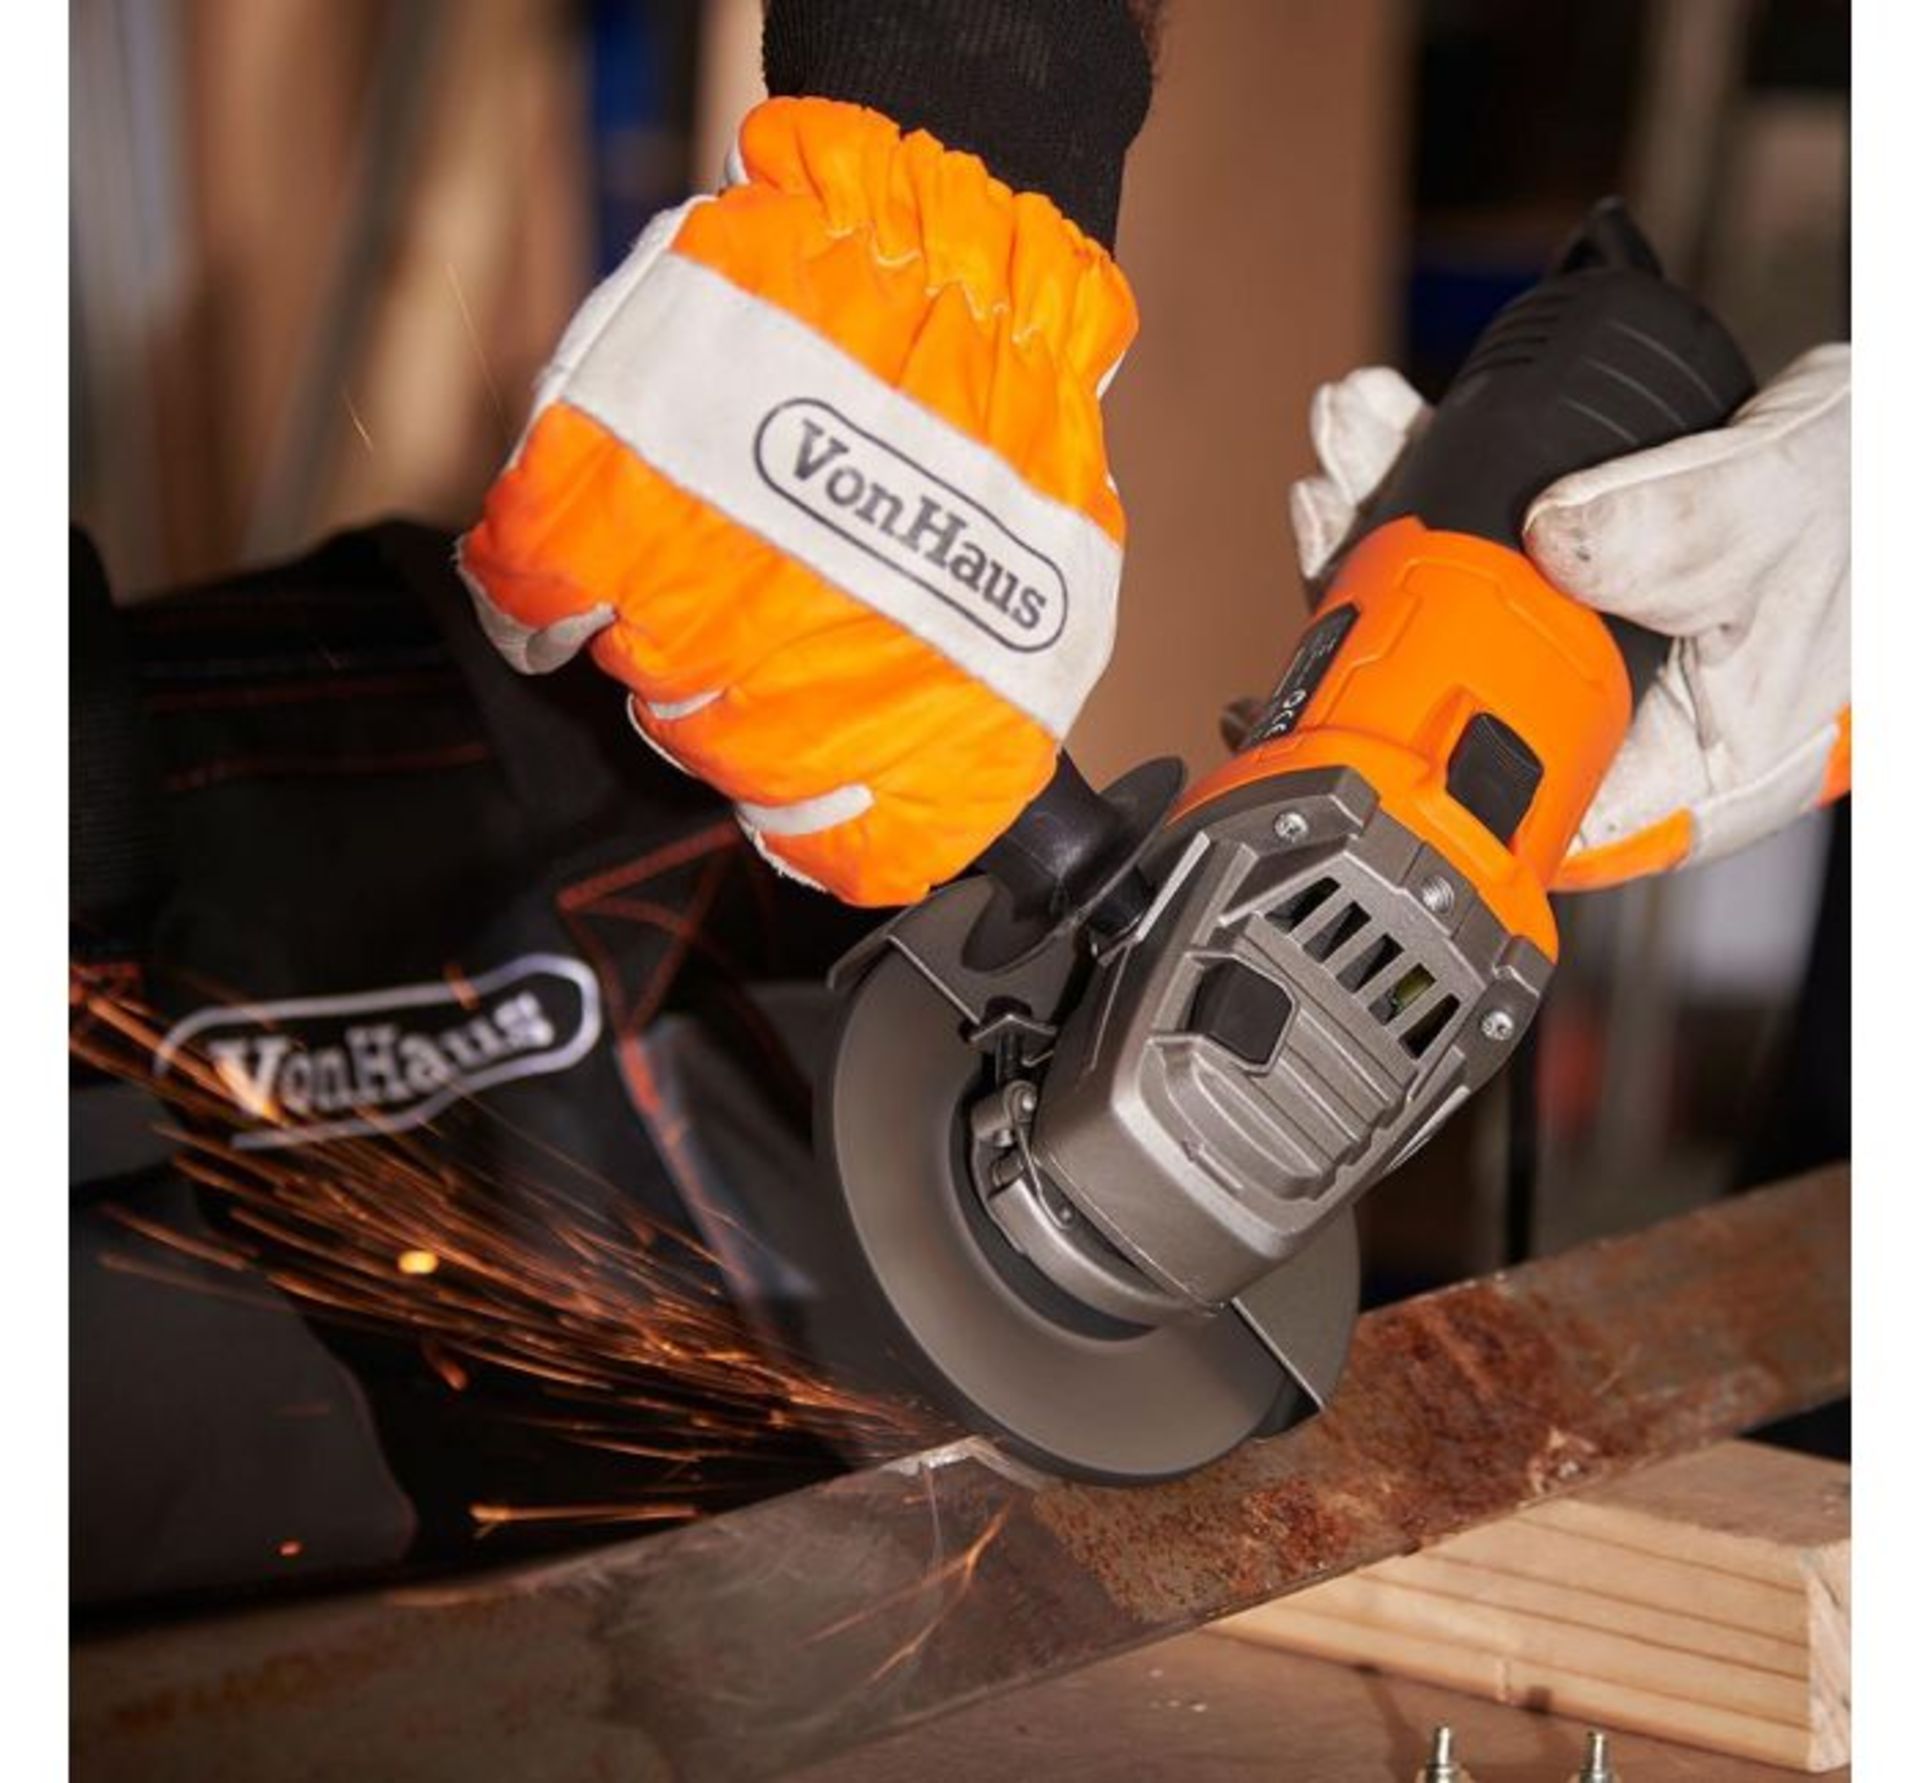 (LT33) 750W Angle Grinder Make clean cuts, grind and polish surfaces with this small yet versa...